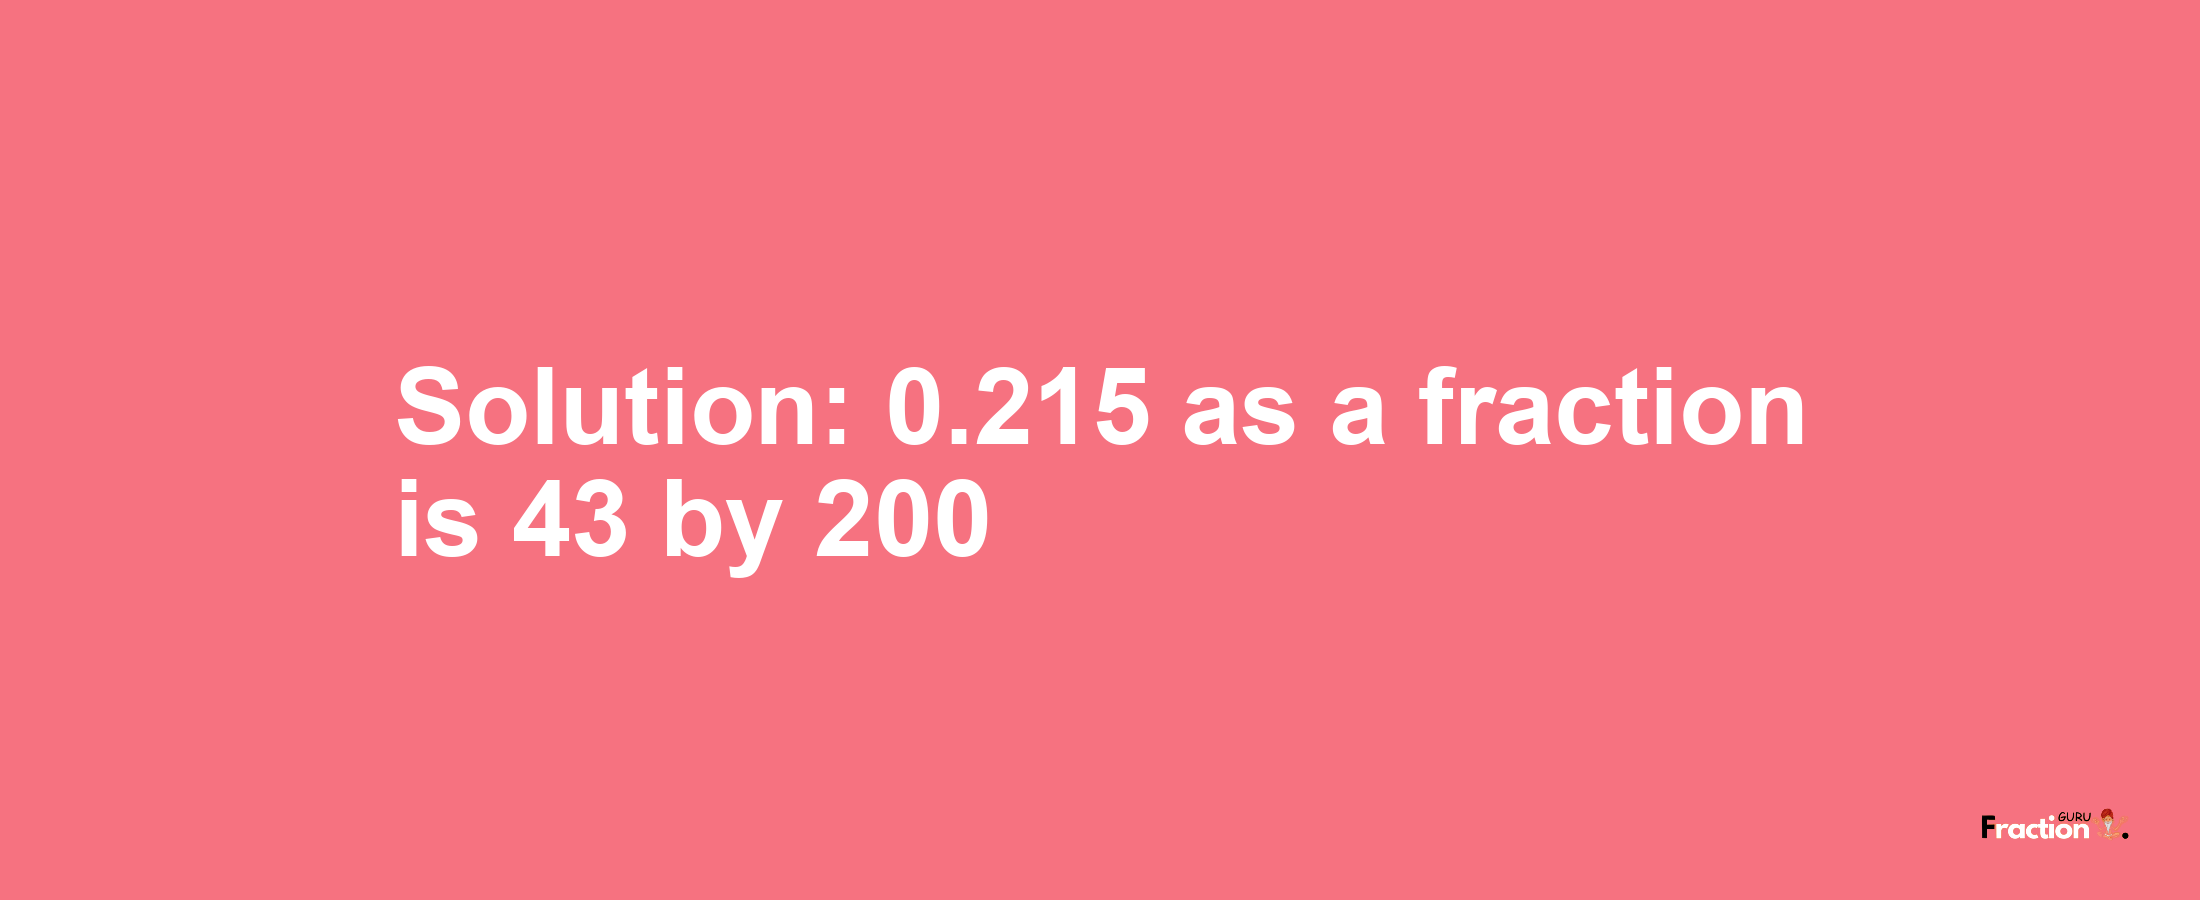 Solution:0.215 as a fraction is 43/200